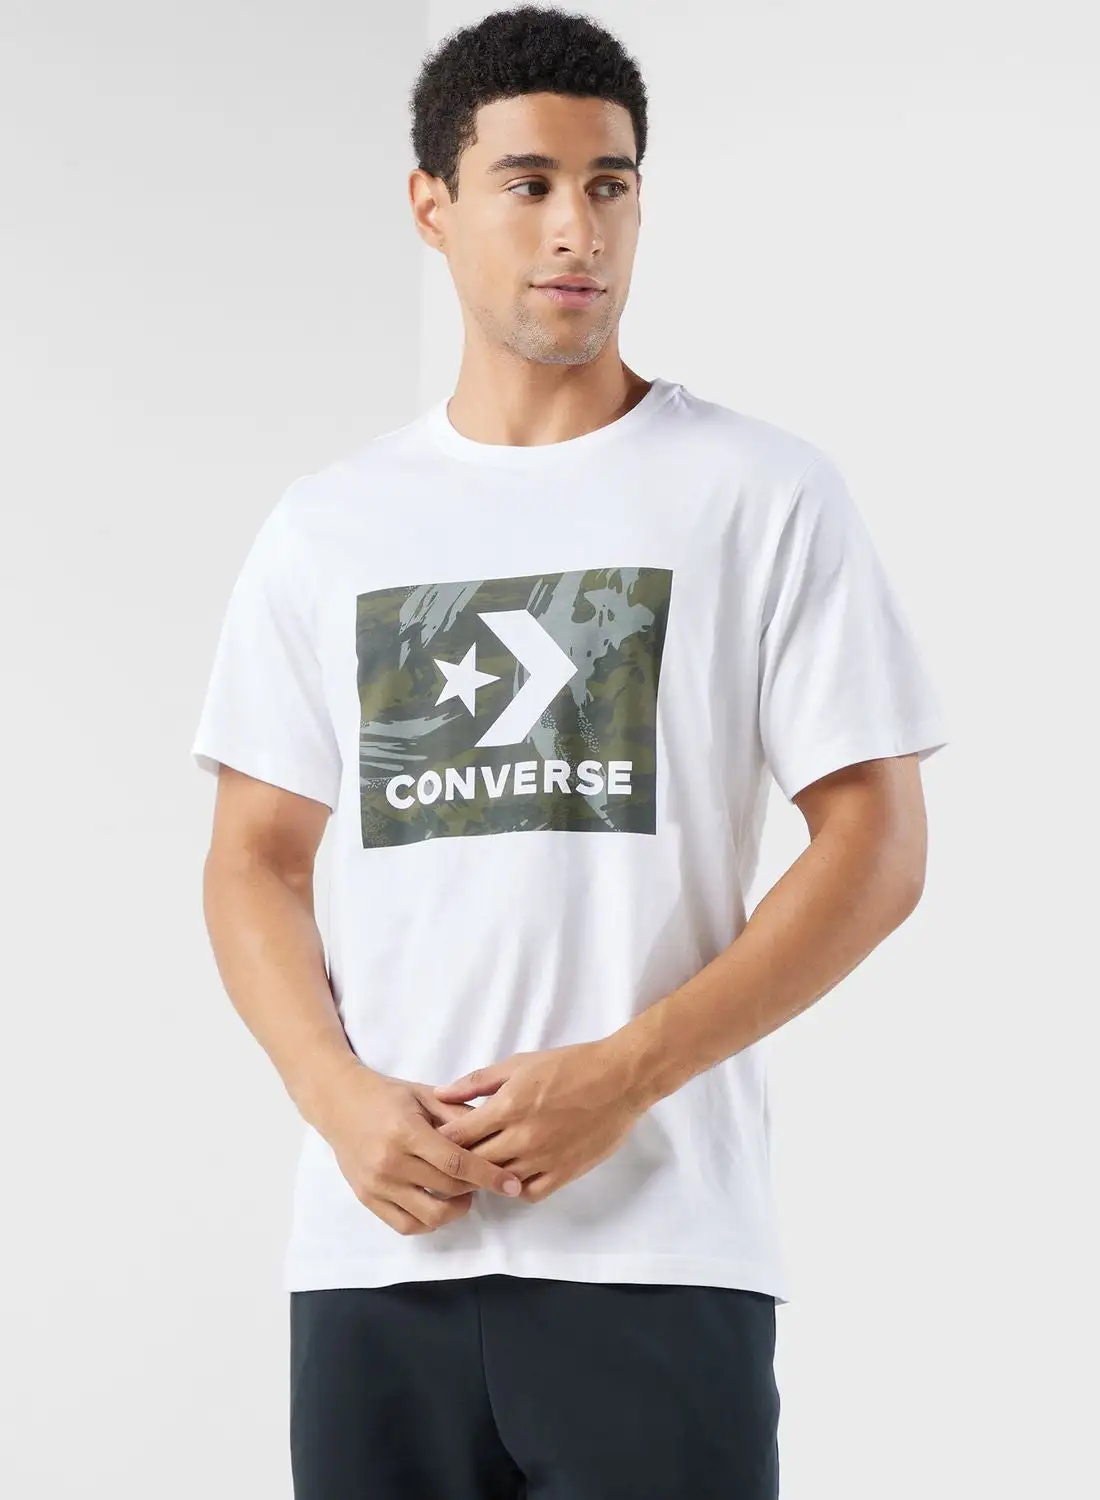 CONVERSE Star Chev Knock Out T-Shirt